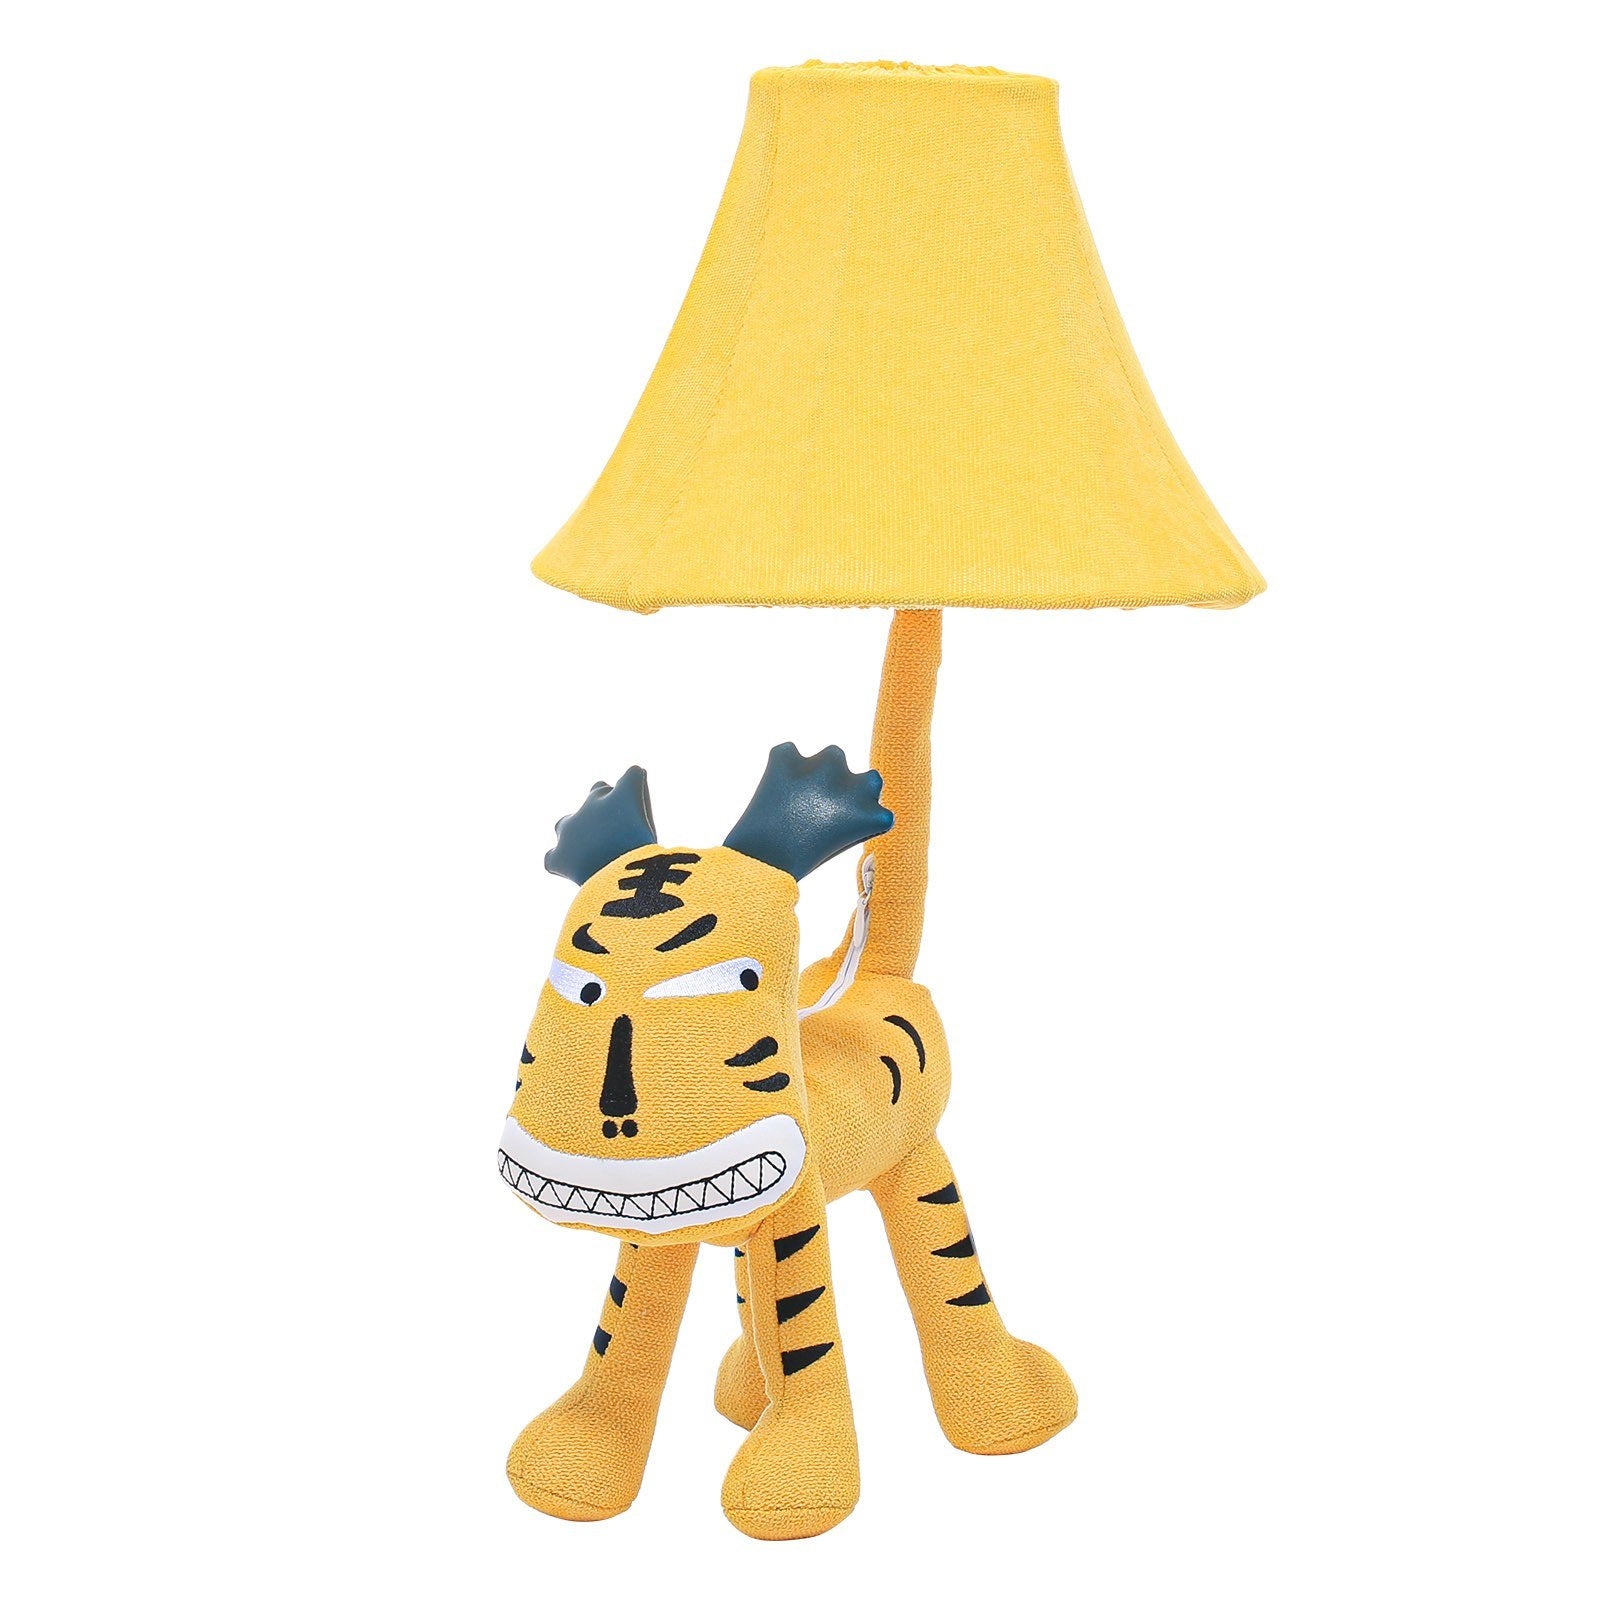 This tiger lamp holds a detachable lampshade and is made of high-quality materials that won't hurt kids in any way